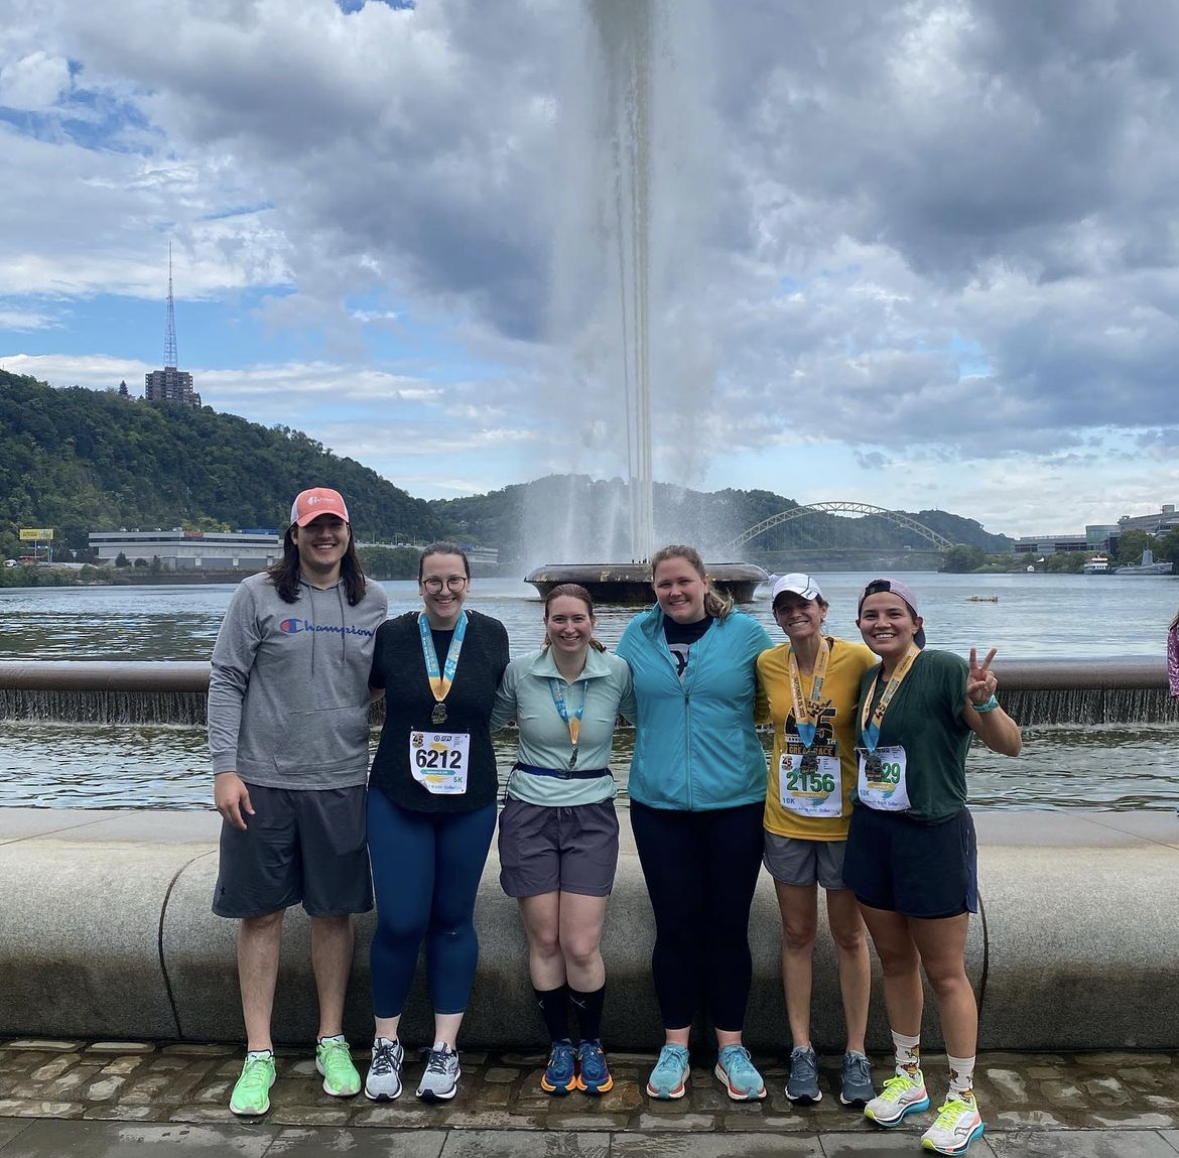 Psychiatry resident runners at Pittsburgh's Point State Park